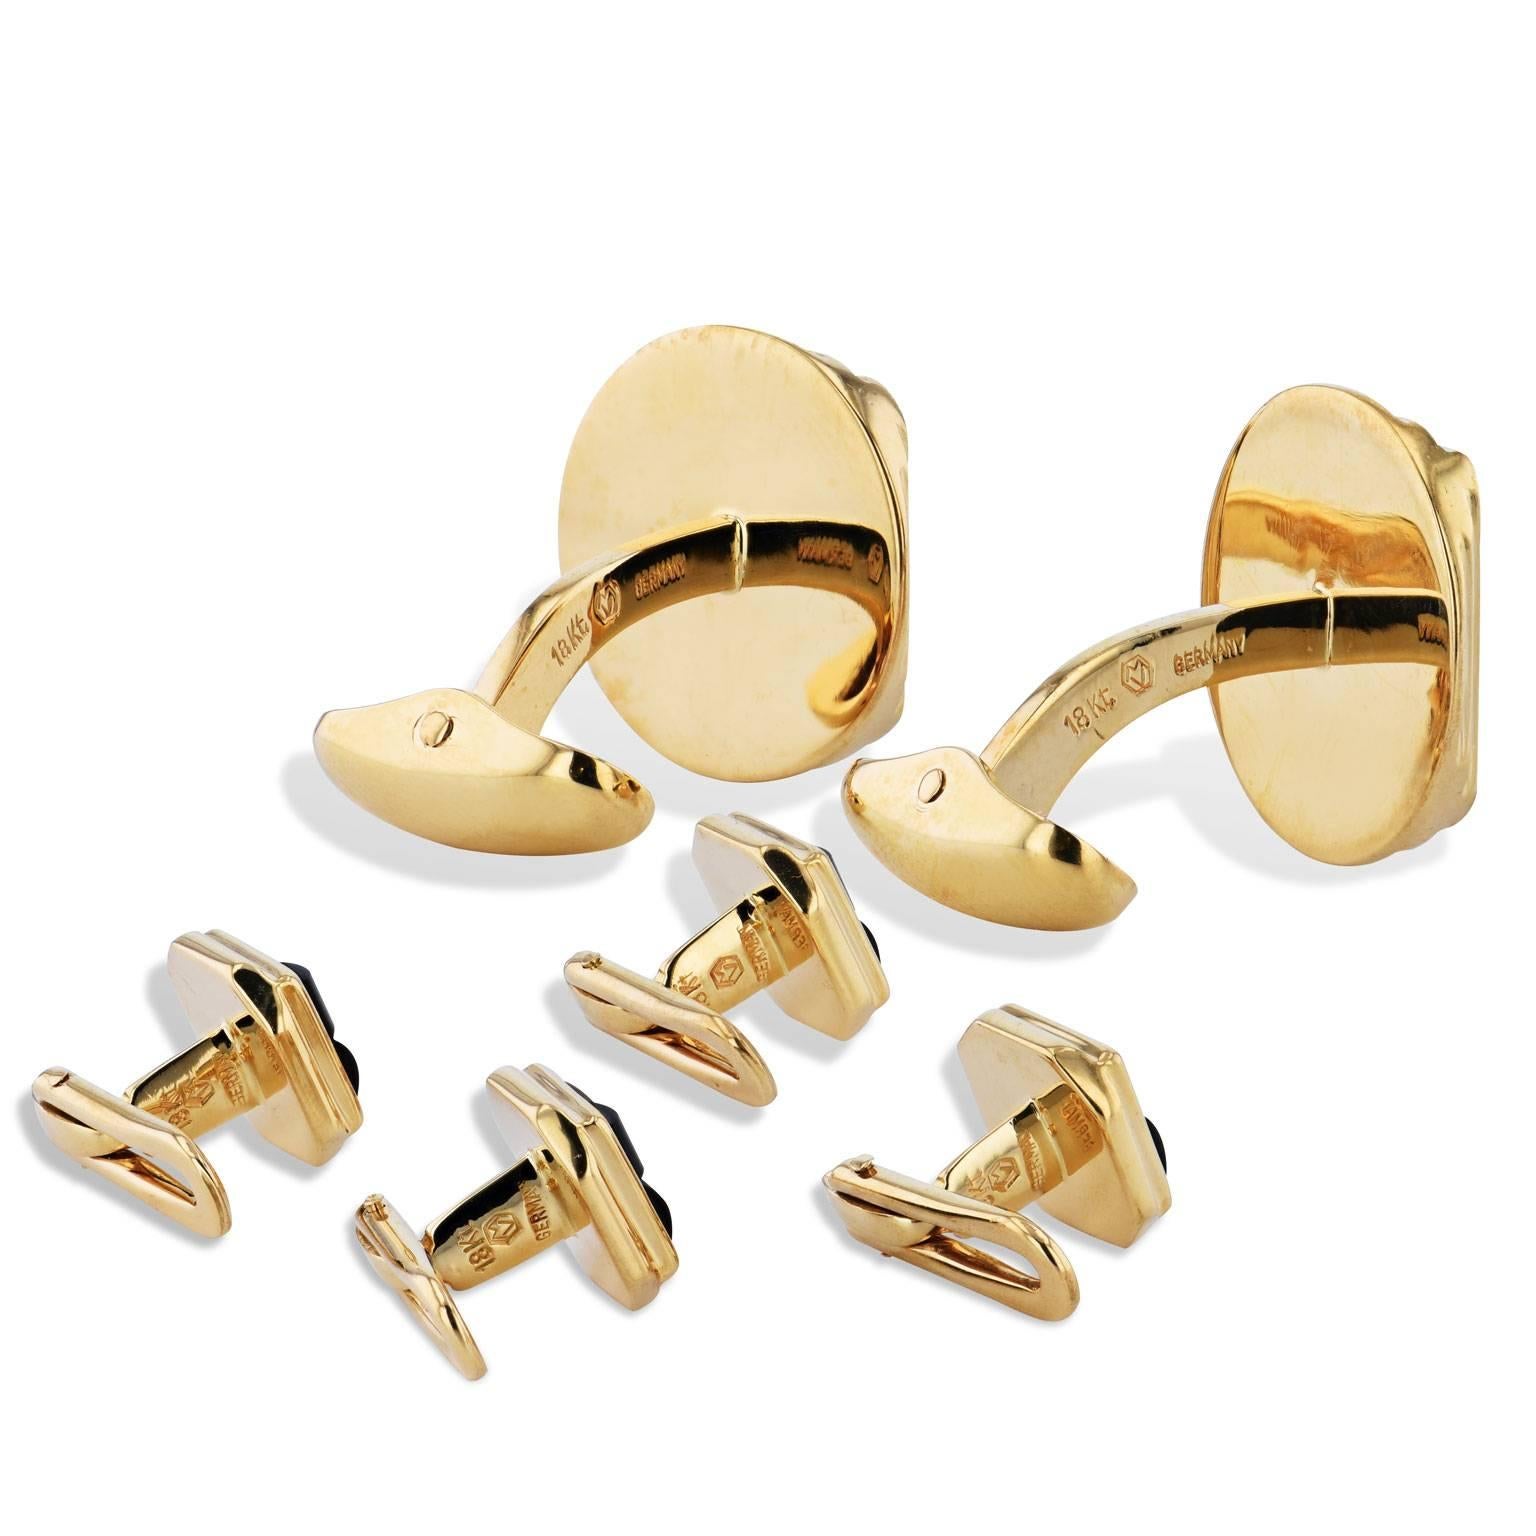 Make an edgy and fashion-forward purchase with these previously loved 18 karat yellow gold onyx cufflinks and shirt studs. The perfect dapper addition to one’s wardrobe.